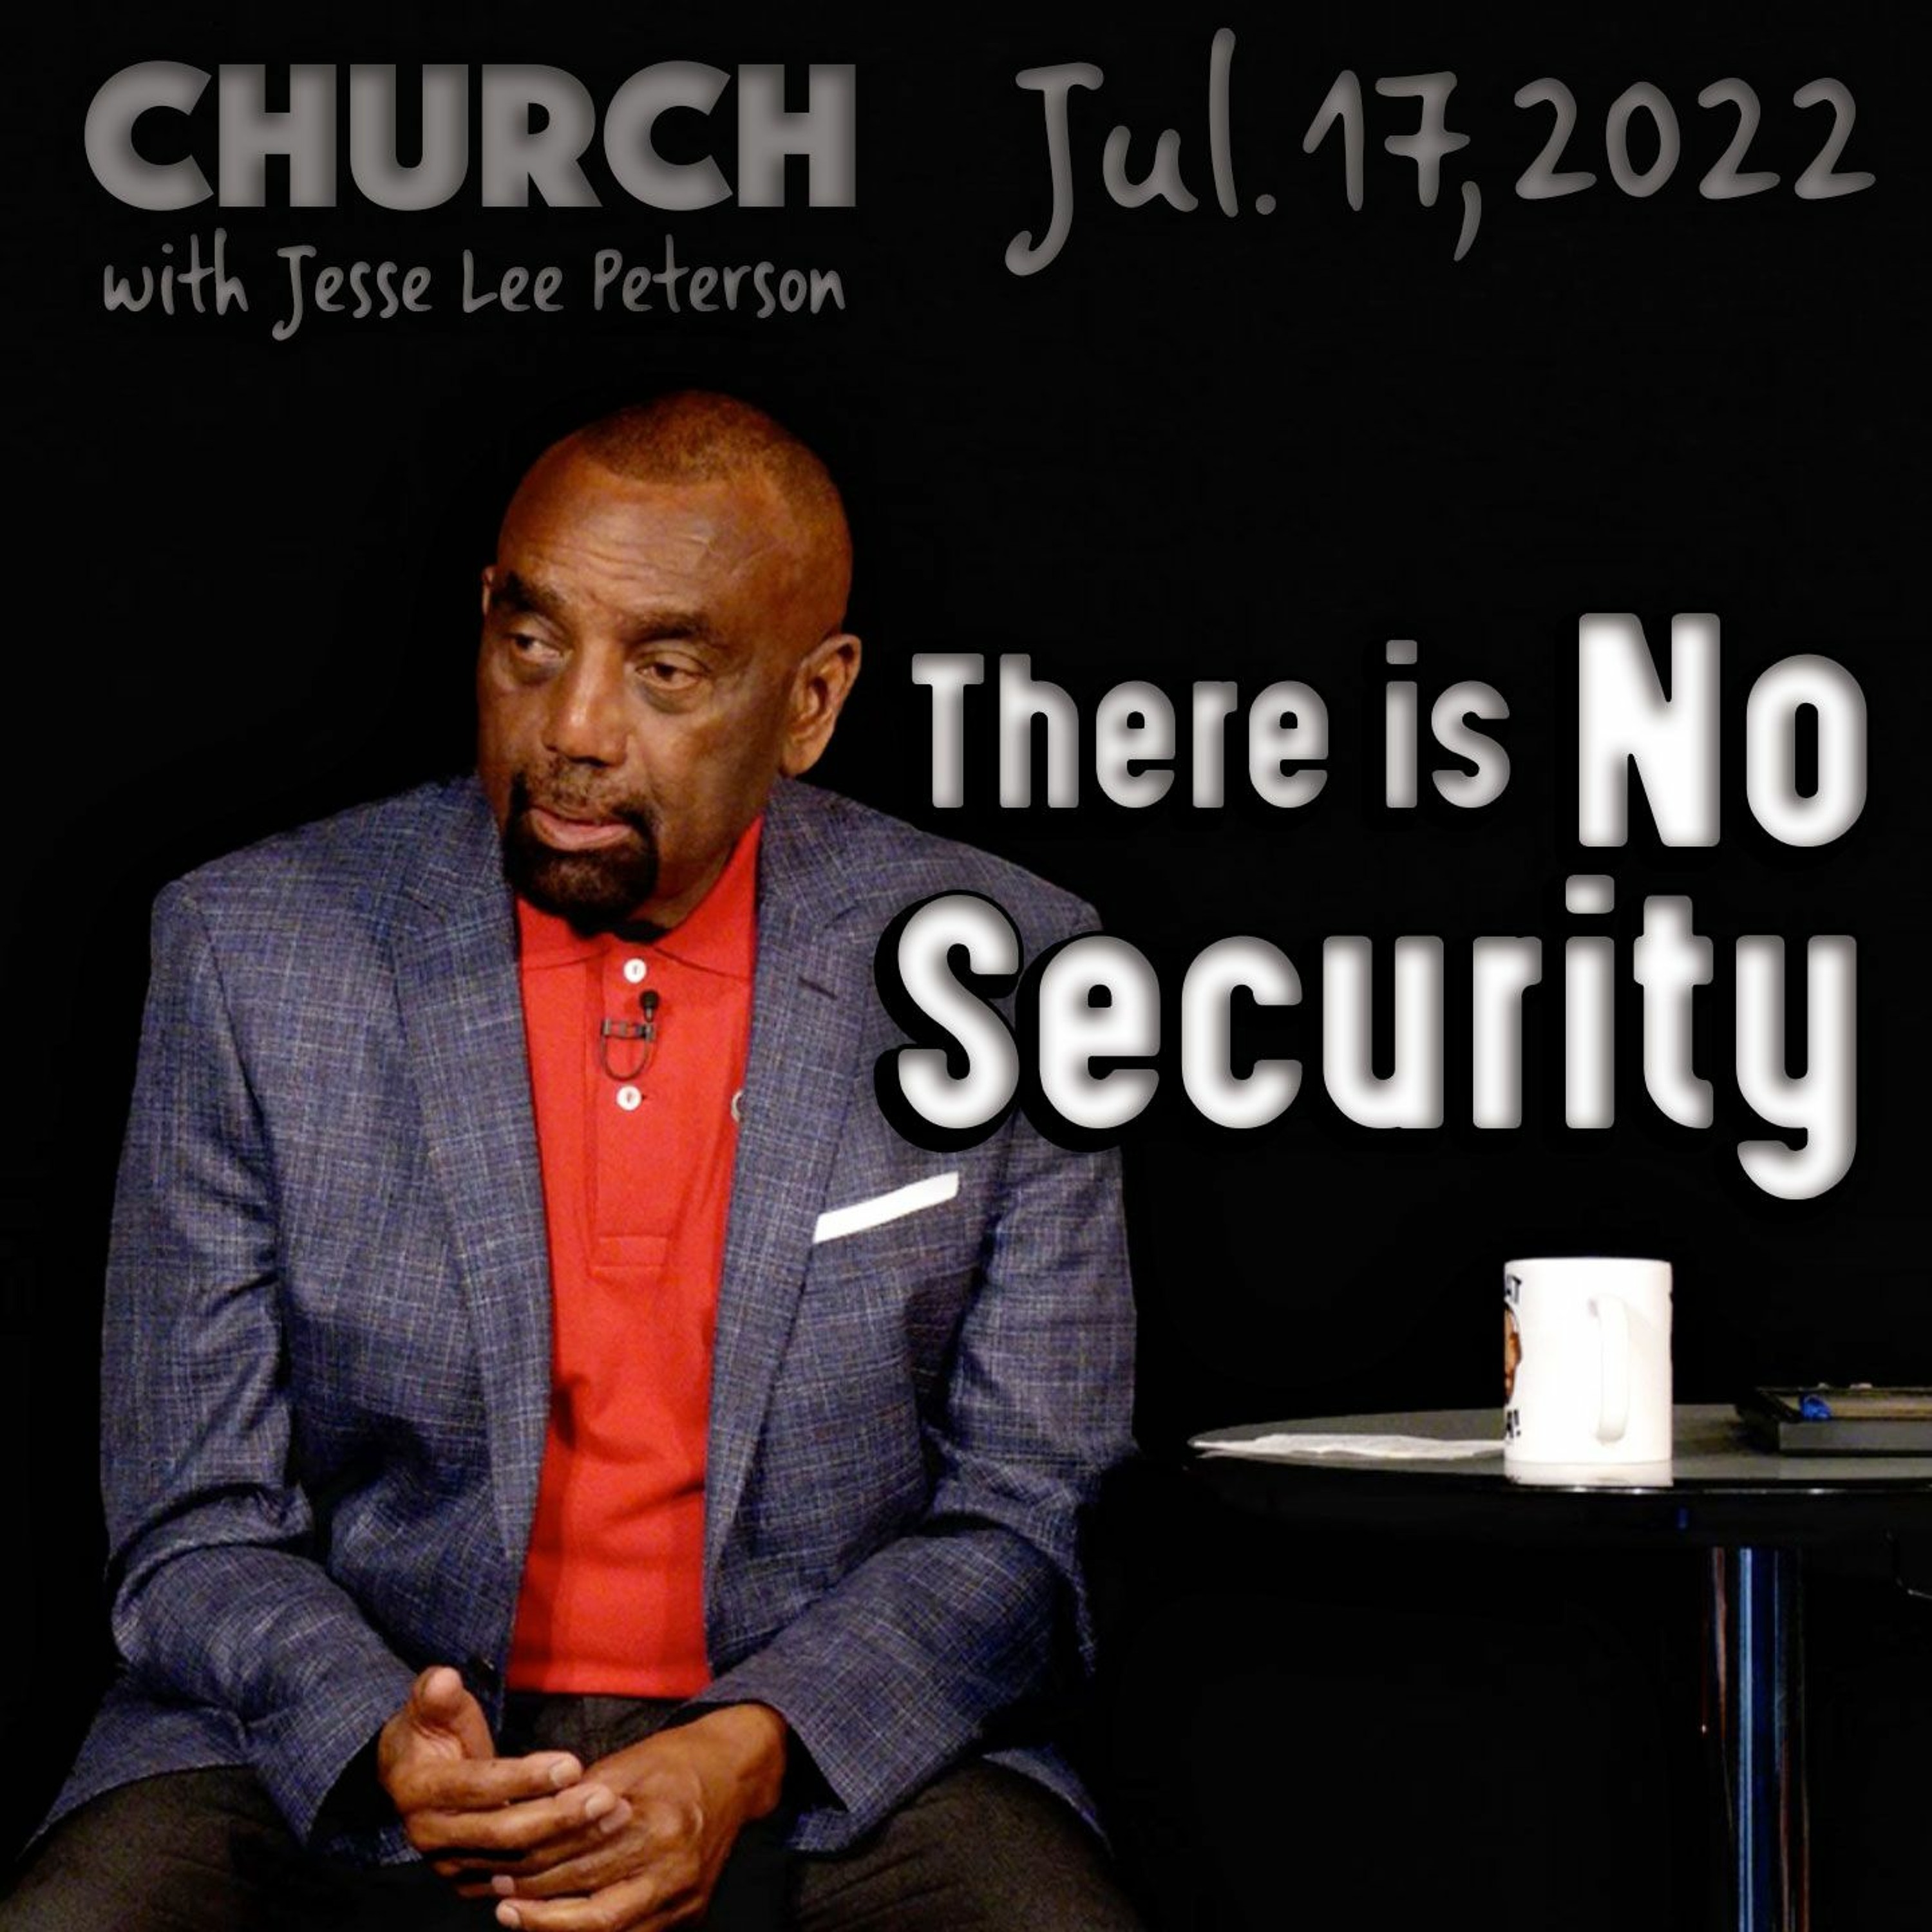 Revolver: From Where Do You Get Your Security? (Church 7/17/22)